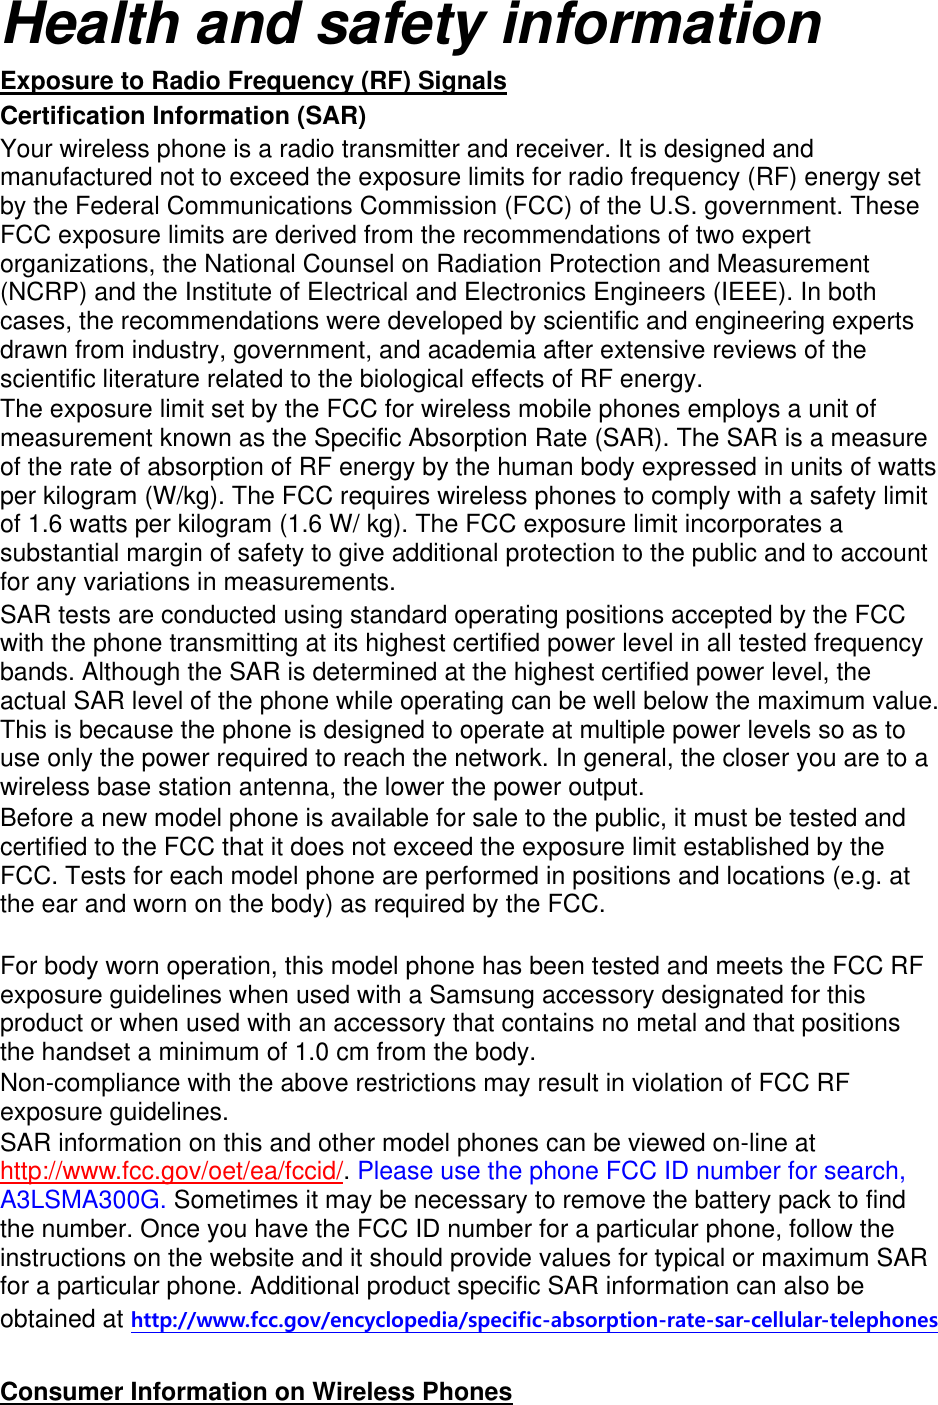 Health and safety information Exposure to Radio Frequency (RF) Signals Certification Information (SAR) Your wireless phone is a radio transmitter and receiver. It is designed and manufactured not to exceed the exposure limits for radio frequency (RF) energy set by the Federal Communications Commission (FCC) of the U.S. government. These FCC exposure limits are derived from the recommendations of two expert organizations, the National Counsel on Radiation Protection and Measurement (NCRP) and the Institute of Electrical and Electronics Engineers (IEEE). In both cases, the recommendations were developed by scientific and engineering experts drawn from industry, government, and academia after extensive reviews of the scientific literature related to the biological effects of RF energy. The exposure limit set by the FCC for wireless mobile phones employs a unit of measurement known as the Specific Absorption Rate (SAR). The SAR is a measure of the rate of absorption of RF energy by the human body expressed in units of watts per kilogram (W/kg). The FCC requires wireless phones to comply with a safety limit of 1.6 watts per kilogram (1.6 W/ kg). The FCC exposure limit incorporates a substantial margin of safety to give additional protection to the public and to account for any variations in measurements. SAR tests are conducted using standard operating positions accepted by the FCC with the phone transmitting at its highest certified power level in all tested frequency bands. Although the SAR is determined at the highest certified power level, the actual SAR level of the phone while operating can be well below the maximum value. This is because the phone is designed to operate at multiple power levels so as to use only the power required to reach the network. In general, the closer you are to a wireless base station antenna, the lower the power output. Before a new model phone is available for sale to the public, it must be tested and certified to the FCC that it does not exceed the exposure limit established by the FCC. Tests for each model phone are performed in positions and locations (e.g. at the ear and worn on the body) as required by the FCC.      For body worn operation, this model phone has been tested and meets the FCC RF exposure guidelines when used with a Samsung accessory designated for this product or when used with an accessory that contains no metal and that positions the handset a minimum of 1.0 cm from the body.   Non-compliance with the above restrictions may result in violation of FCC RF exposure guidelines. SAR information on this and other model phones can be viewed on-line at http://www.fcc.gov/oet/ea/fccid/. Please use the phone FCC ID number for search, A3LSMA300G. Sometimes it may be necessary to remove the battery pack to find the number. Once you have the FCC ID number for a particular phone, follow the instructions on the website and it should provide values for typical or maximum SAR for a particular phone. Additional product specific SAR information can also be obtained at http://www.fcc.gov/encyclopedia/specific-absorption-rate-sar-cellular-telephones  Consumer Information on Wireless Phones 